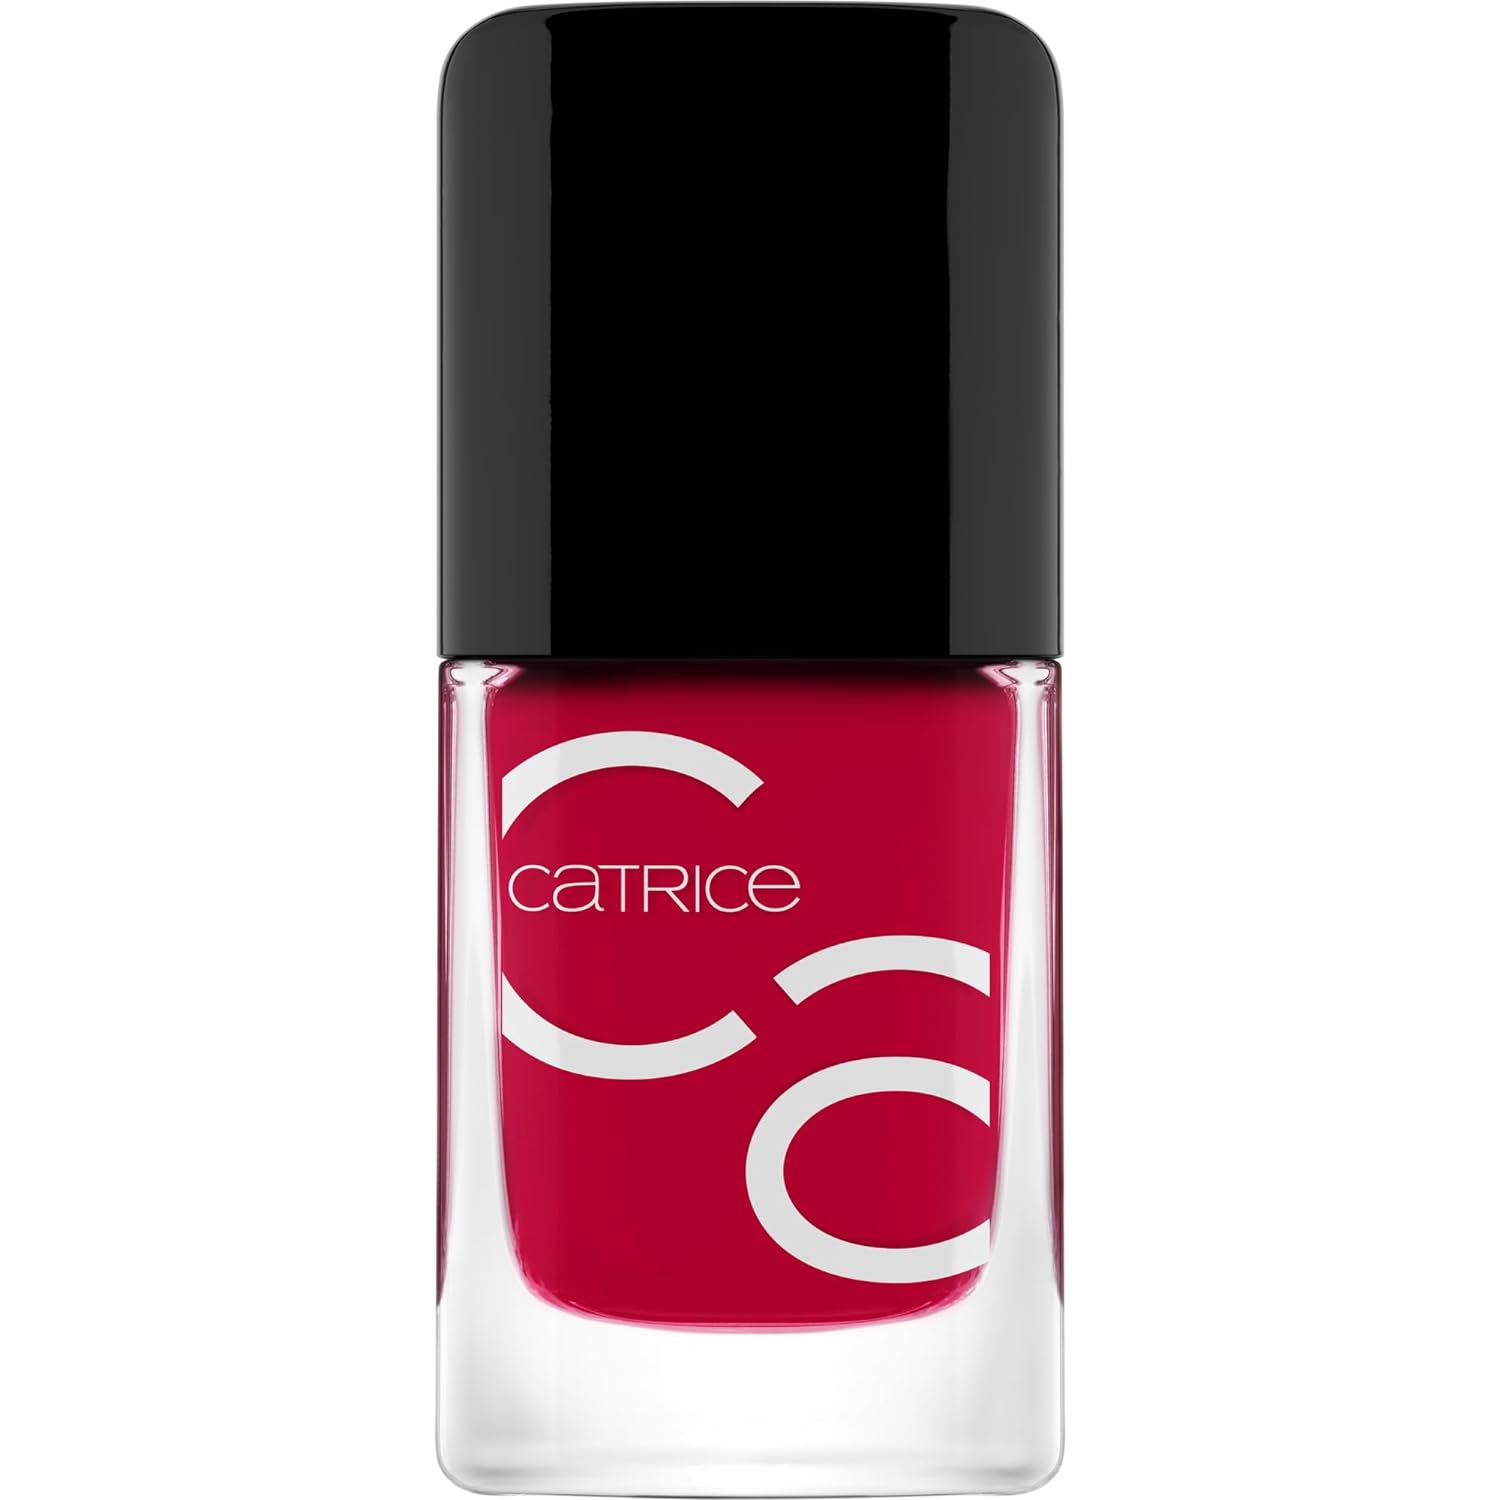 Catrice Catrice Iconails Gel Lacquer, Nail Polish, No. 169, Pink, Long-Lasting, Shiny, Acetone-Free, Vegan, No Microplastic Particles, No Preservatives, Pack of 10.5 ml